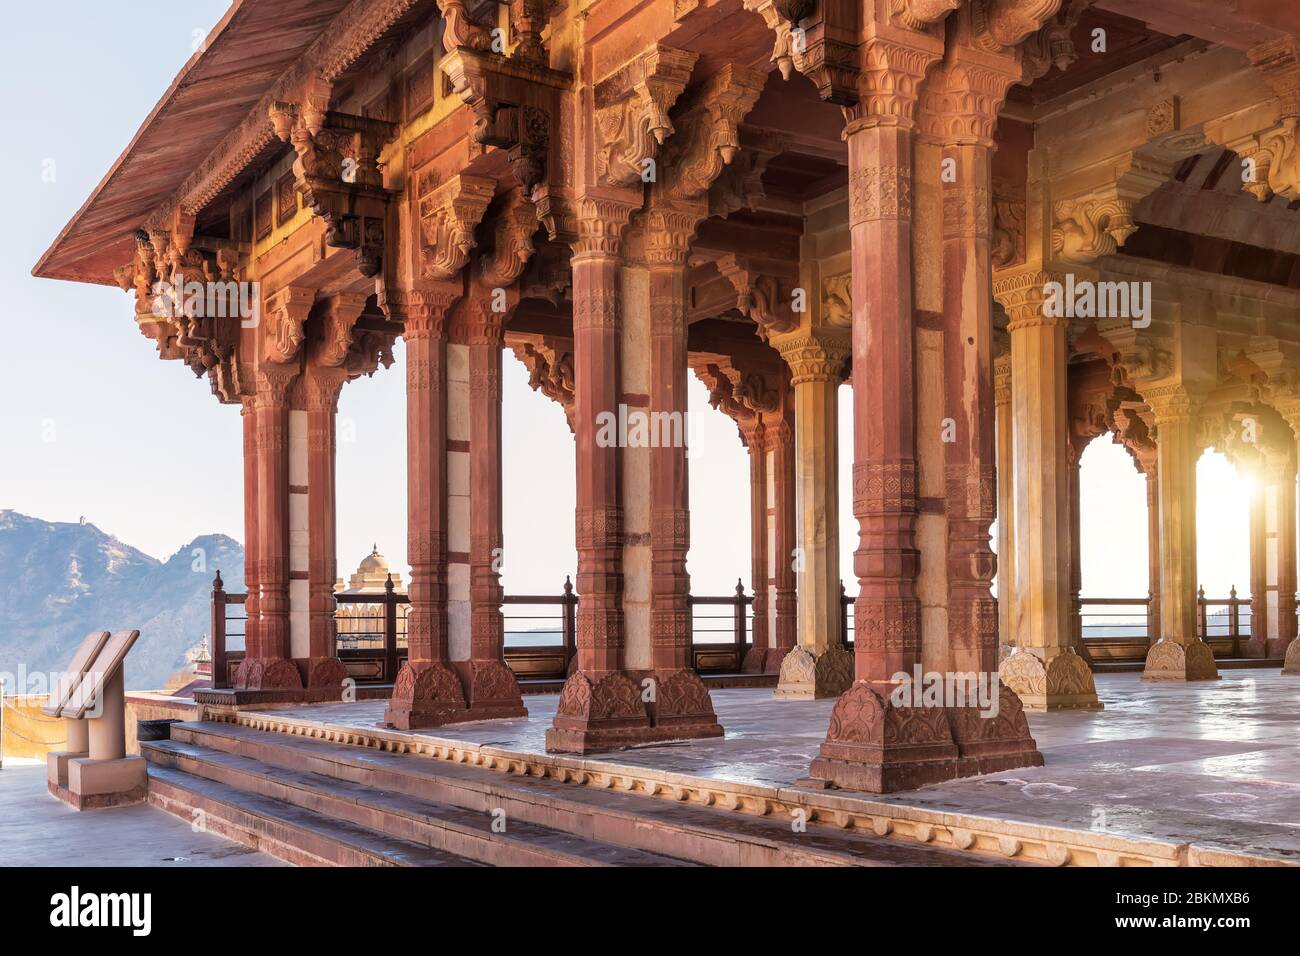 Ganesh Pol Hall in Amber Fort Jaipur, India Stock Photo